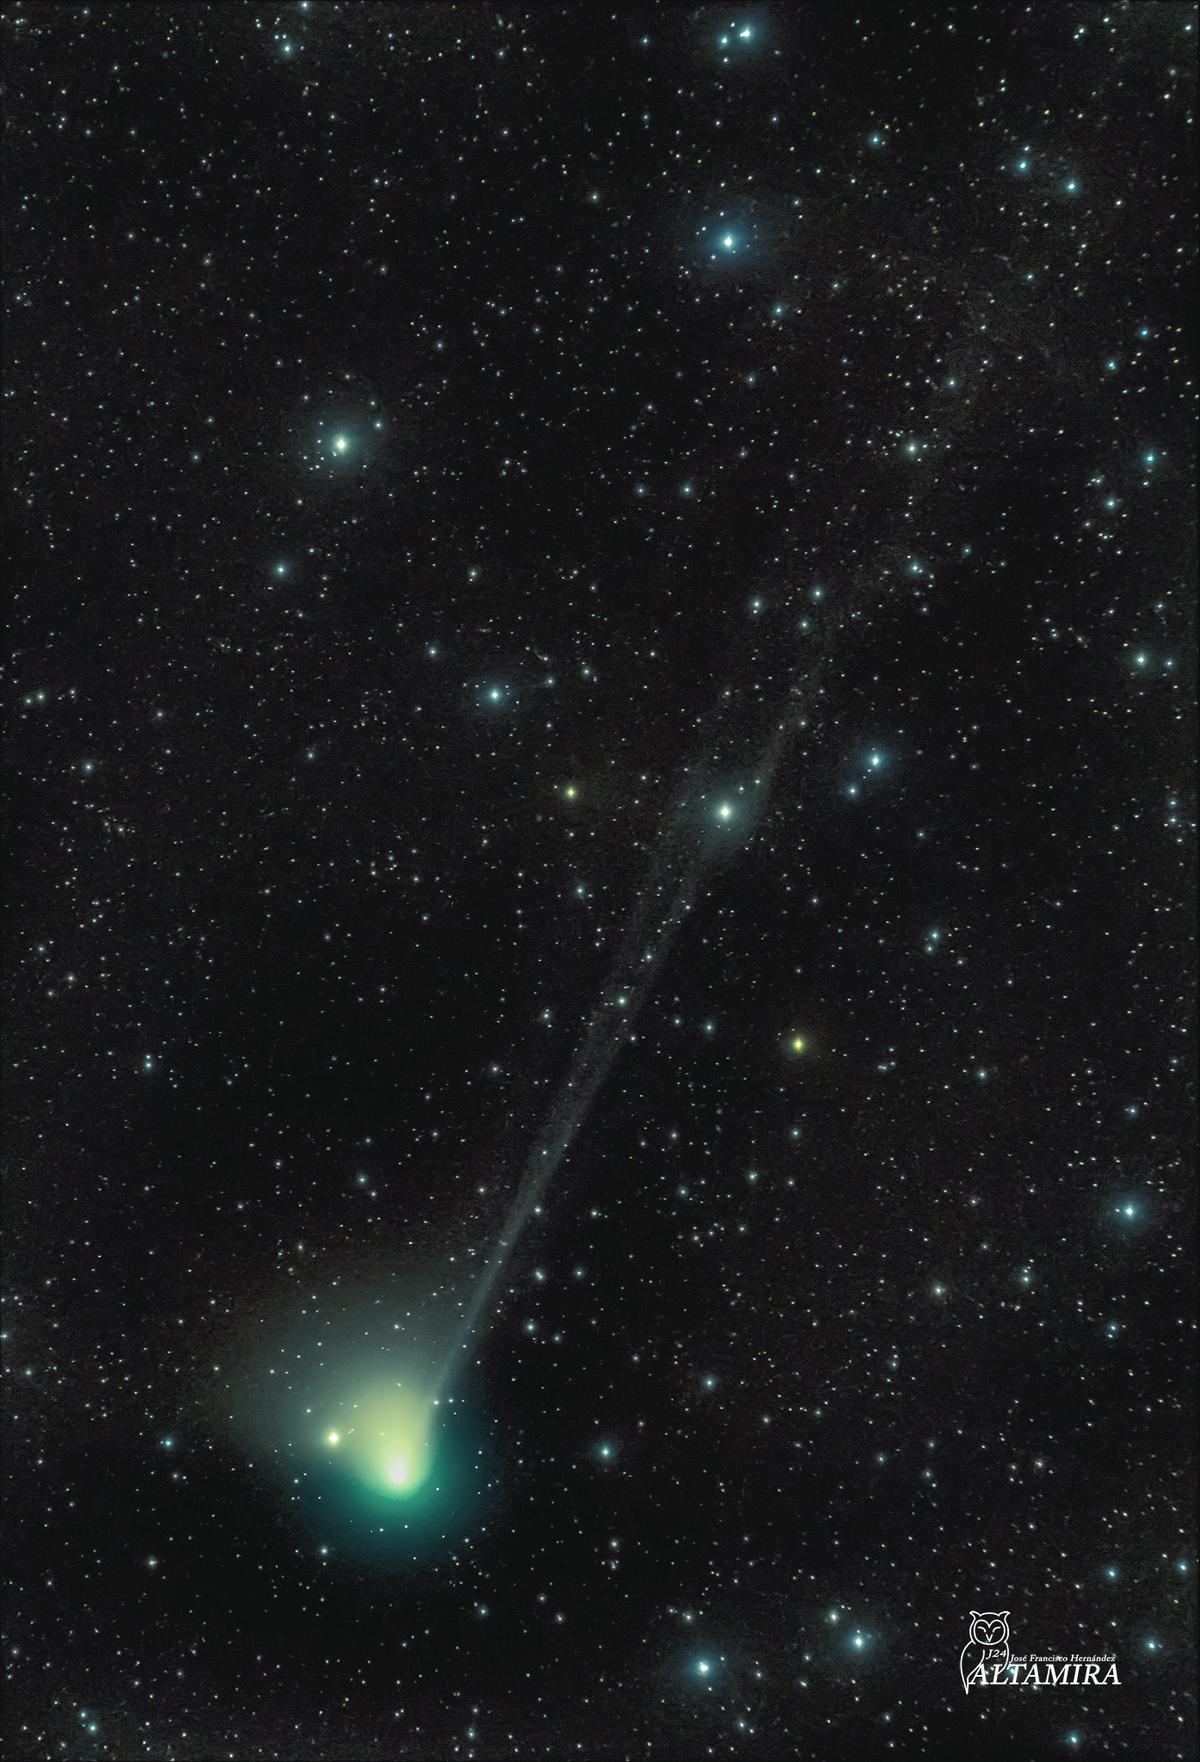 C/2022 E3 ZTF exhibits a green coma and yellow-tinged ion tail. (Courtesy of <a href="https://www.facebook.com/josefrancisco.hernandez.1048">Jose Francisco Hernandez</a>)